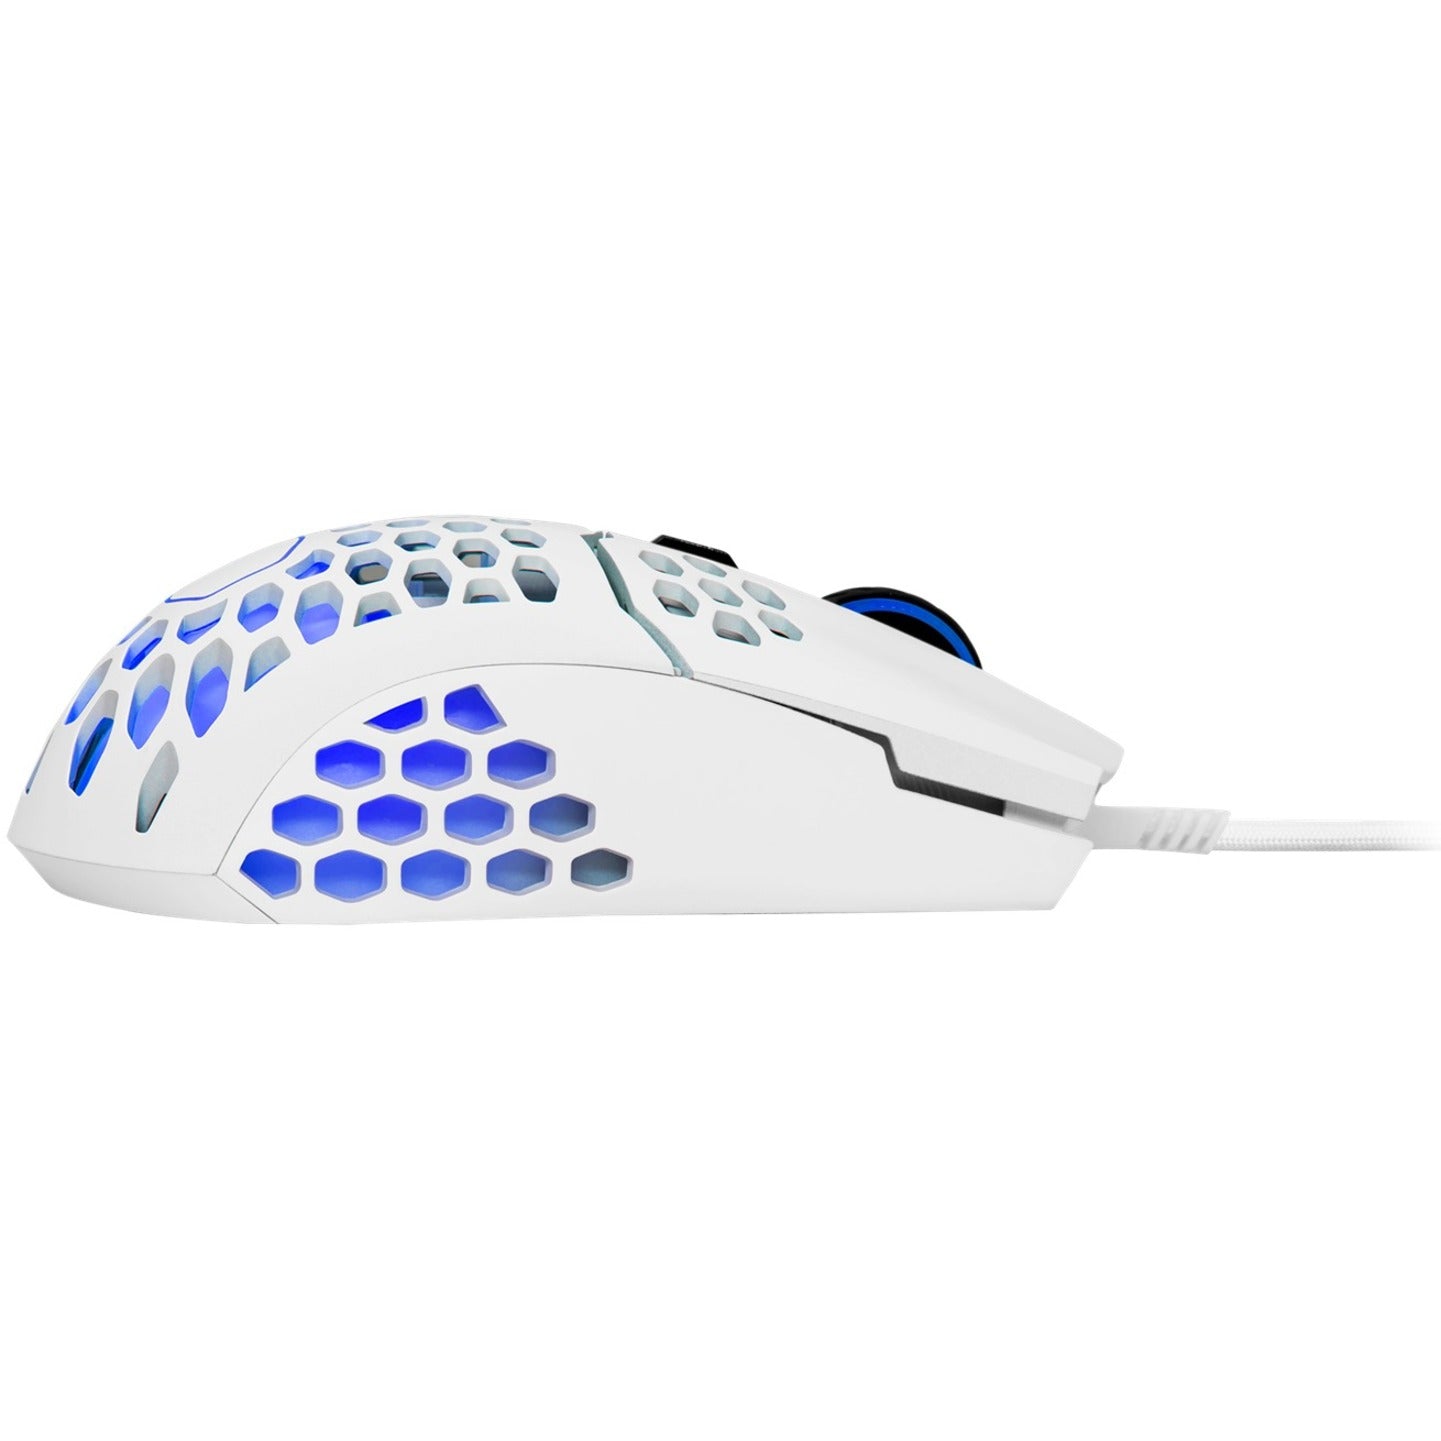 Cooler Master MM-711-WWOL1 MasterMouse MM711 Gaming Mouse, Ergonomic Fit, 16000 dpi, 2 Year Warranty